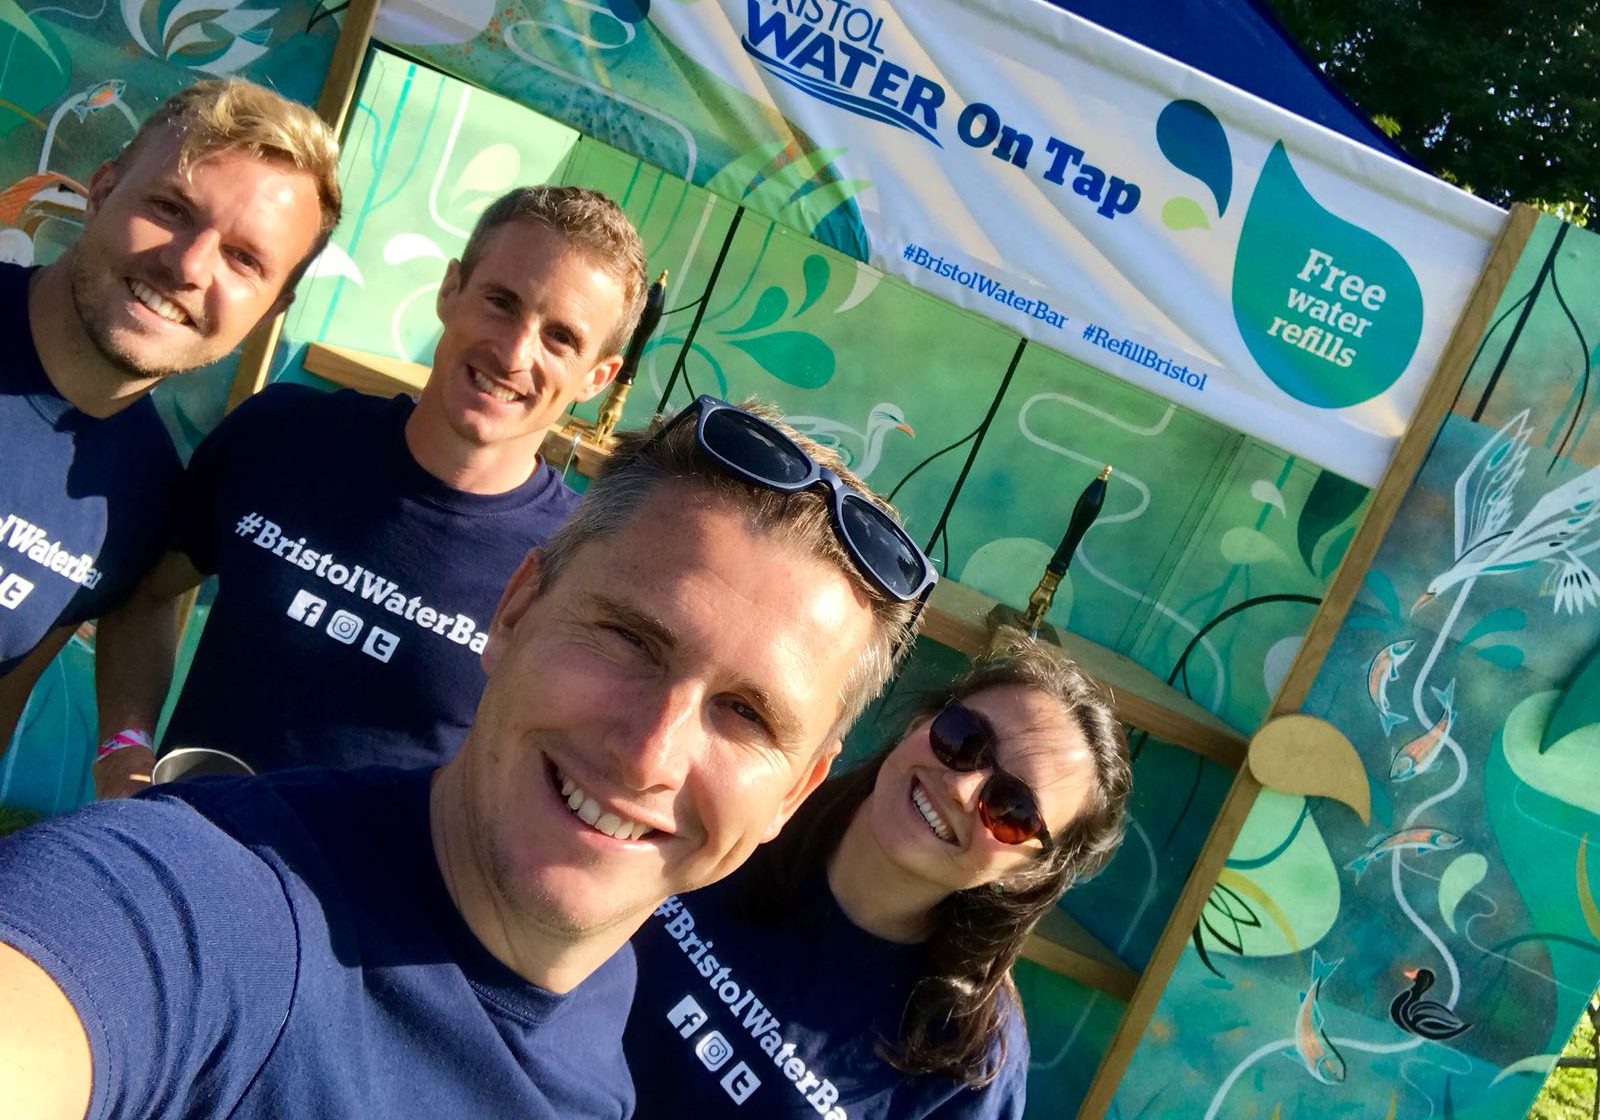 the Bristol Water team posing outside the water bar